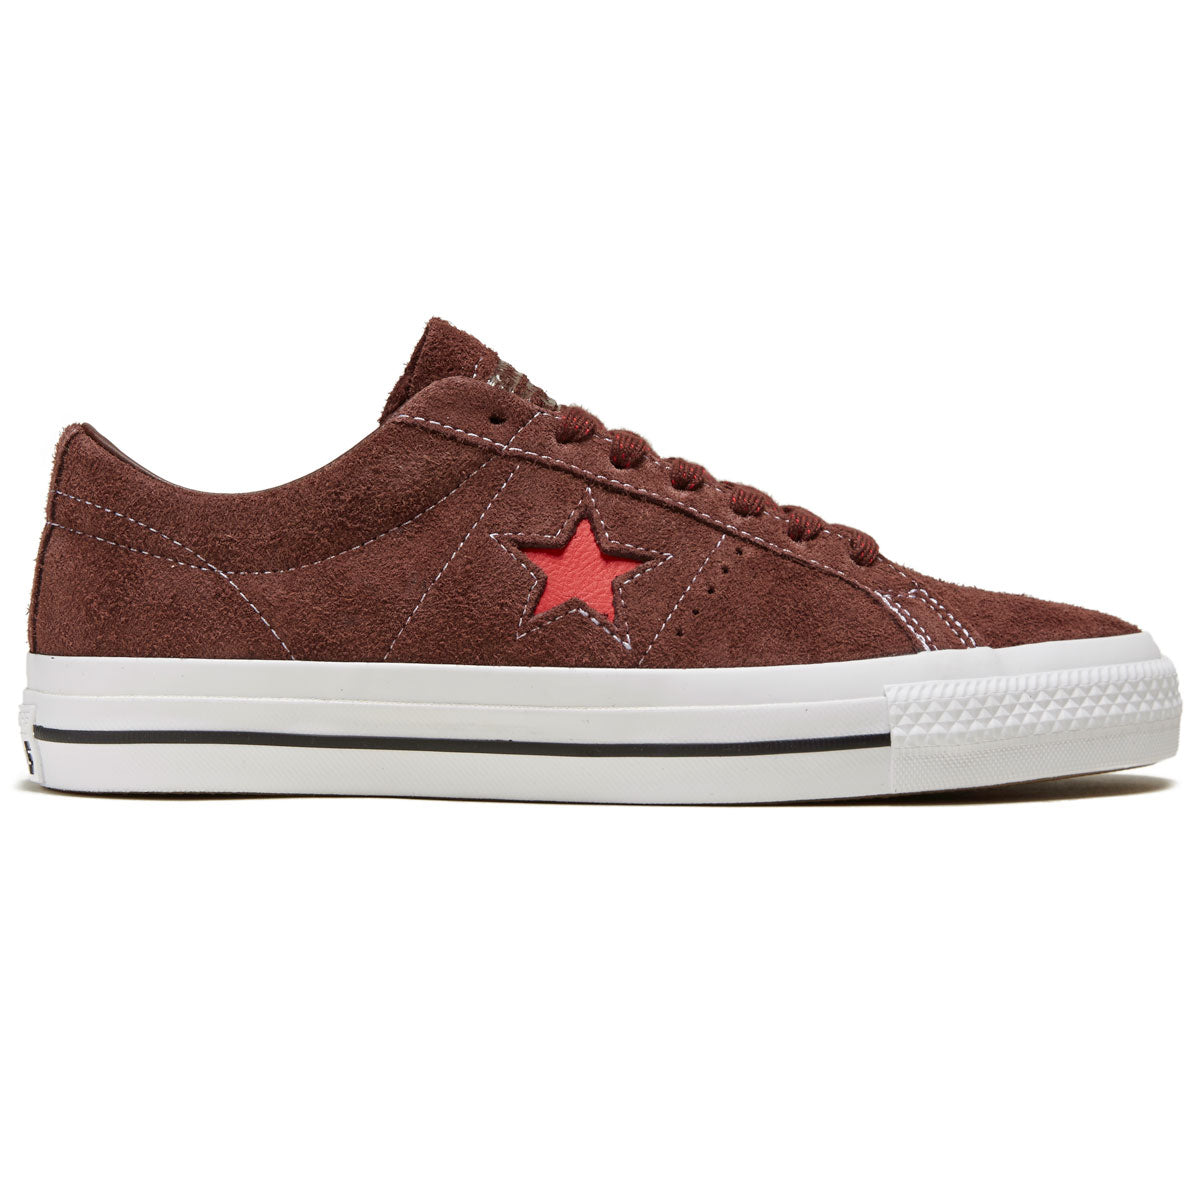 Converse One Star Pro Ox Shoes - Eternal Earth/White/Red image 1